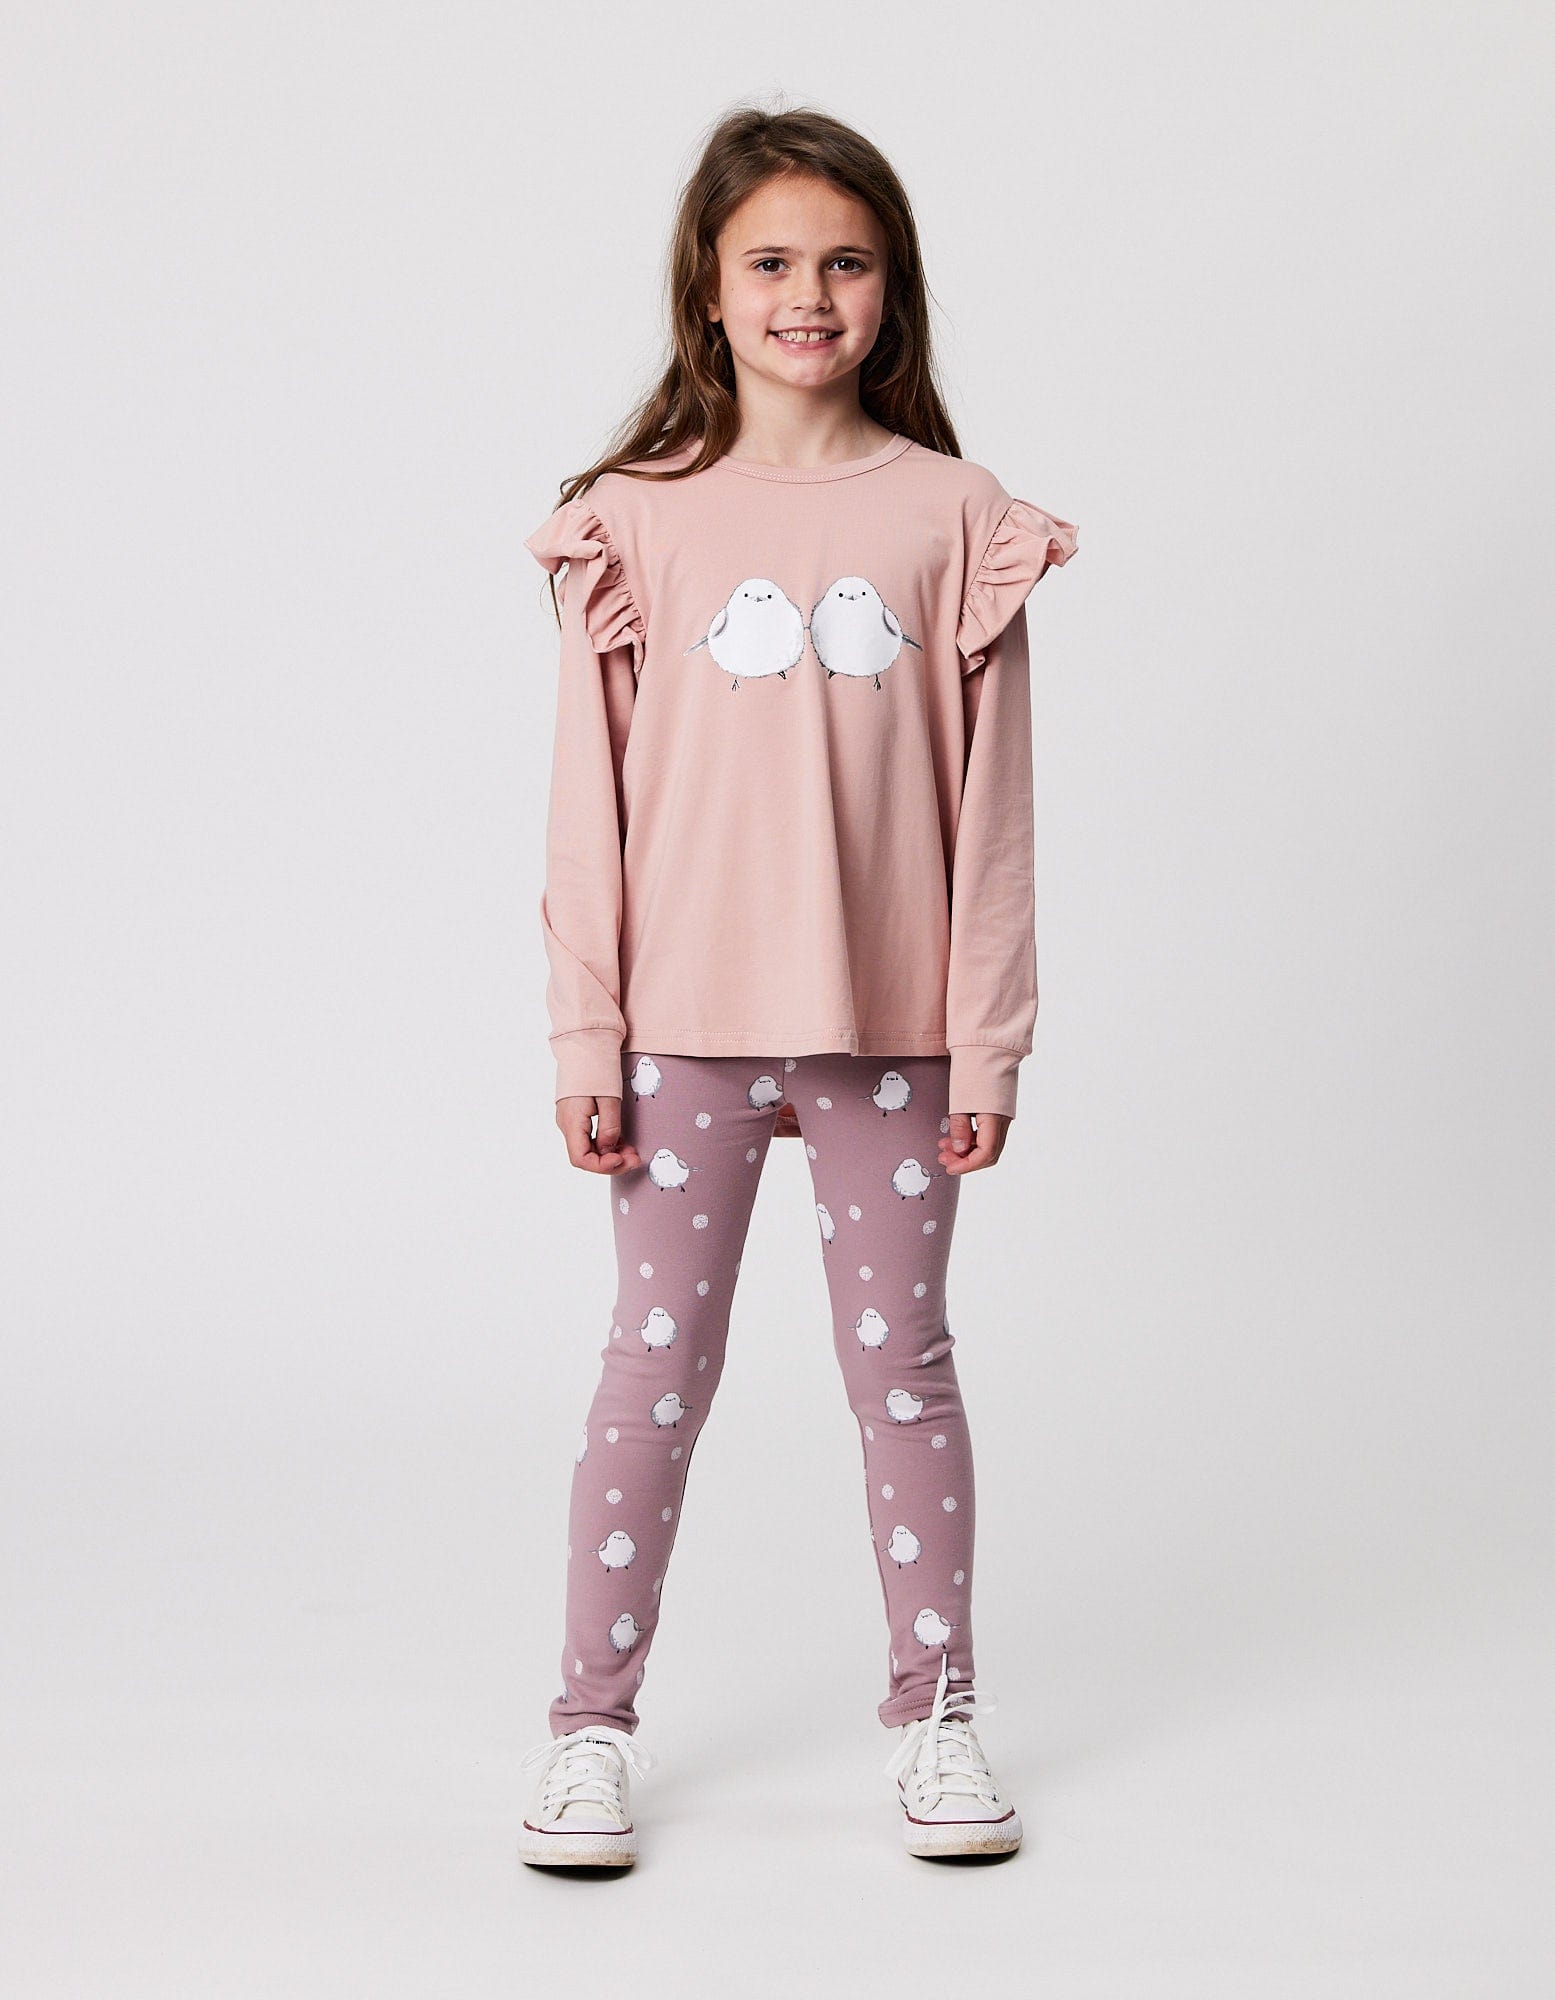 Kissed By Radicool Girls Top Snow Fairy Frill L/S Tee